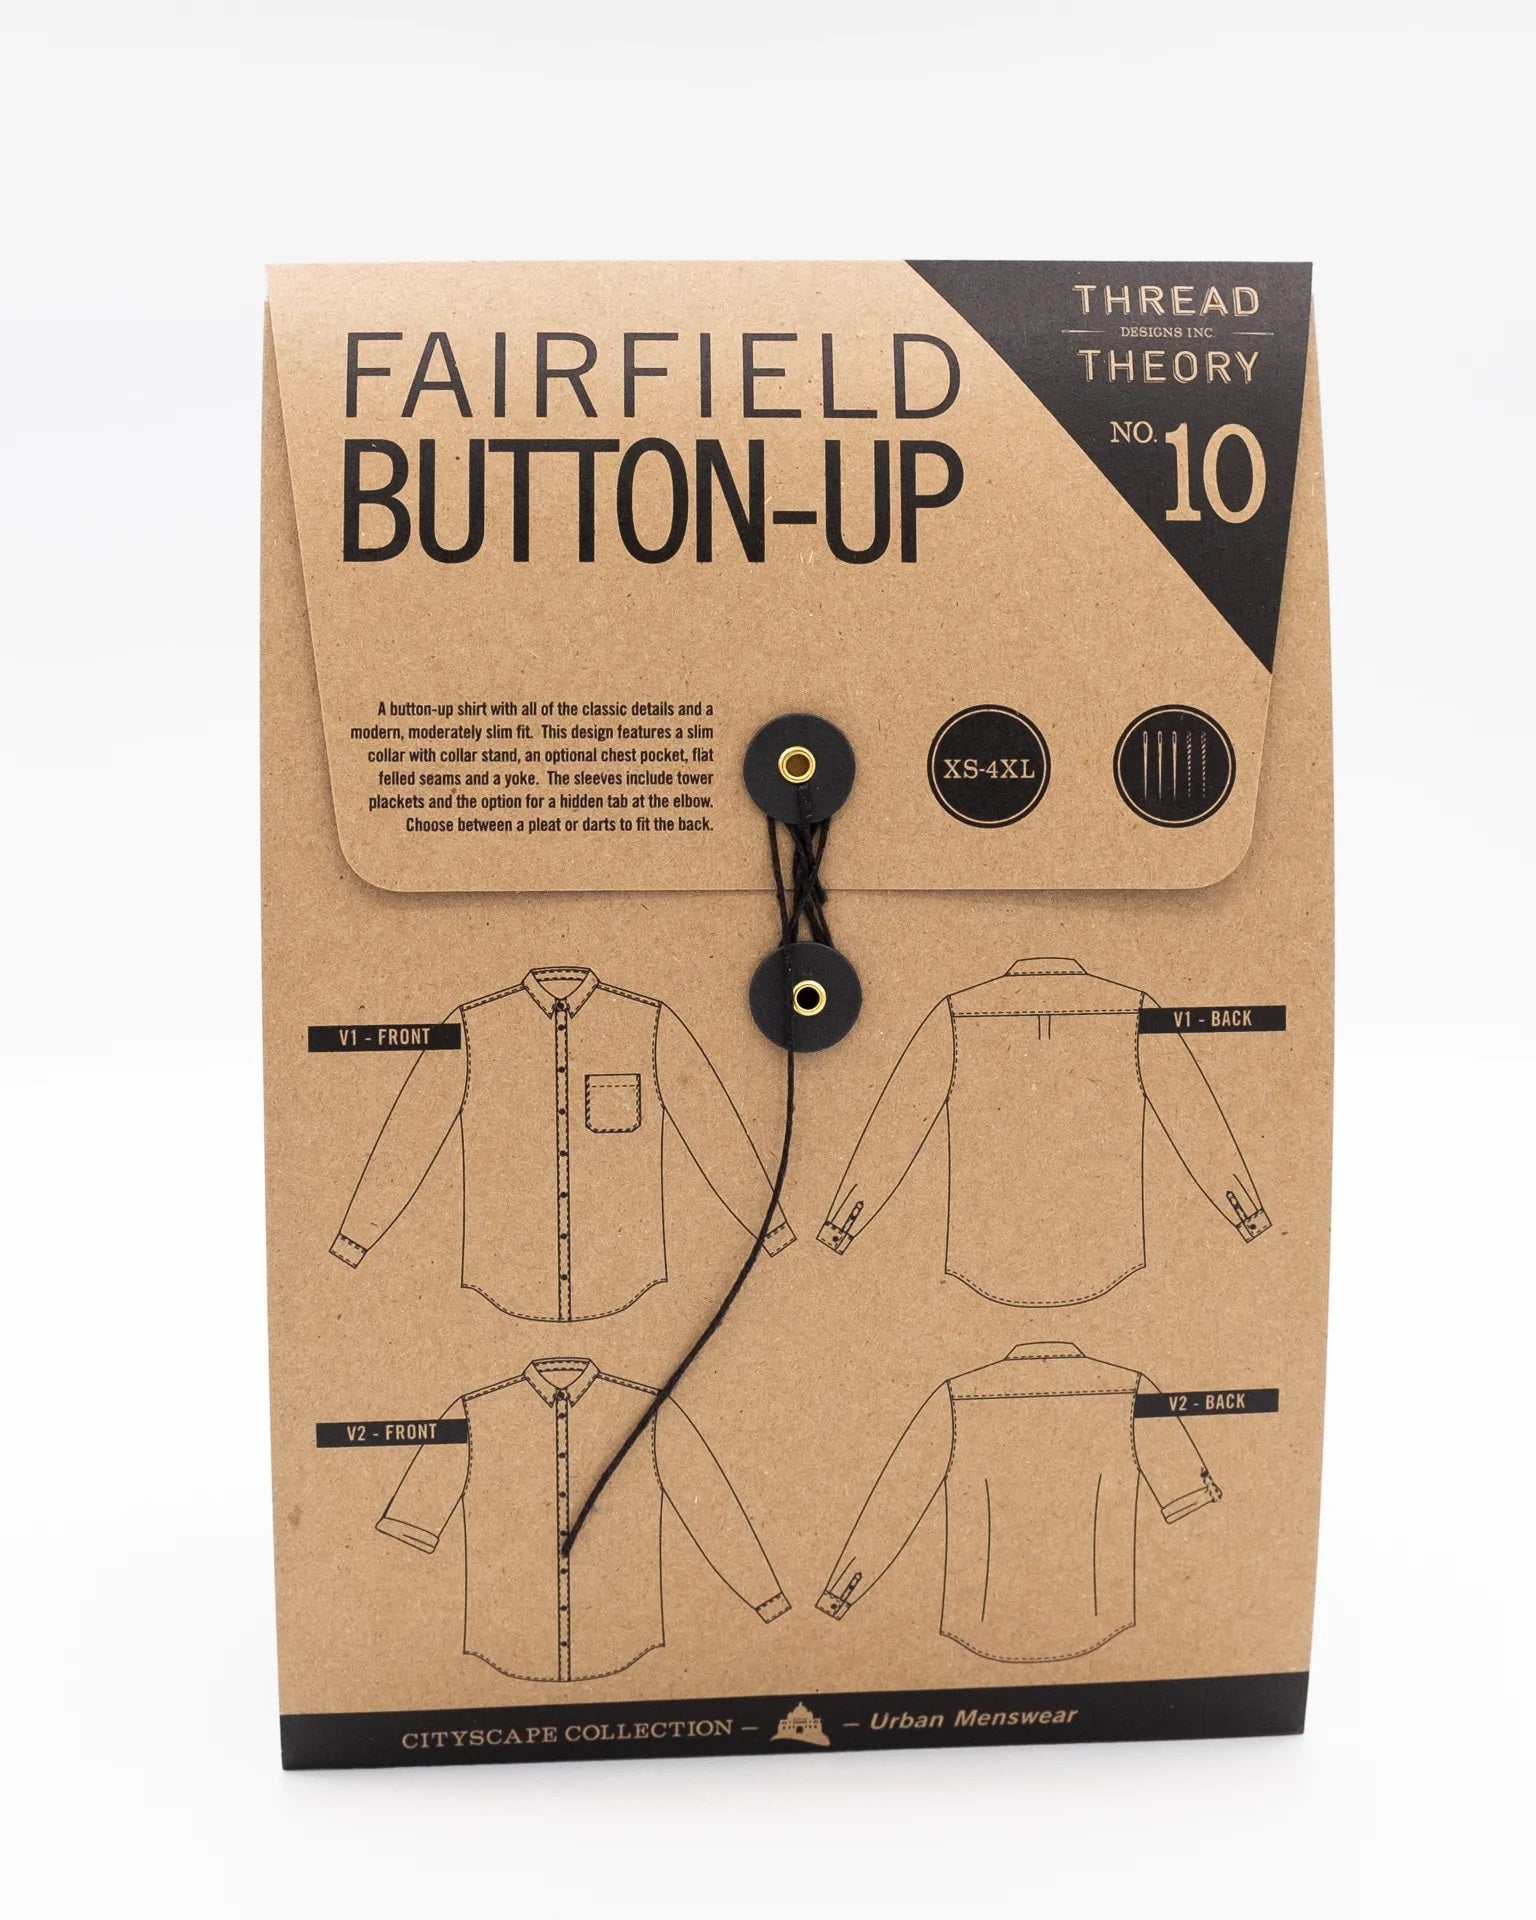 Fairfield Button Up Pattern by Thread Theory